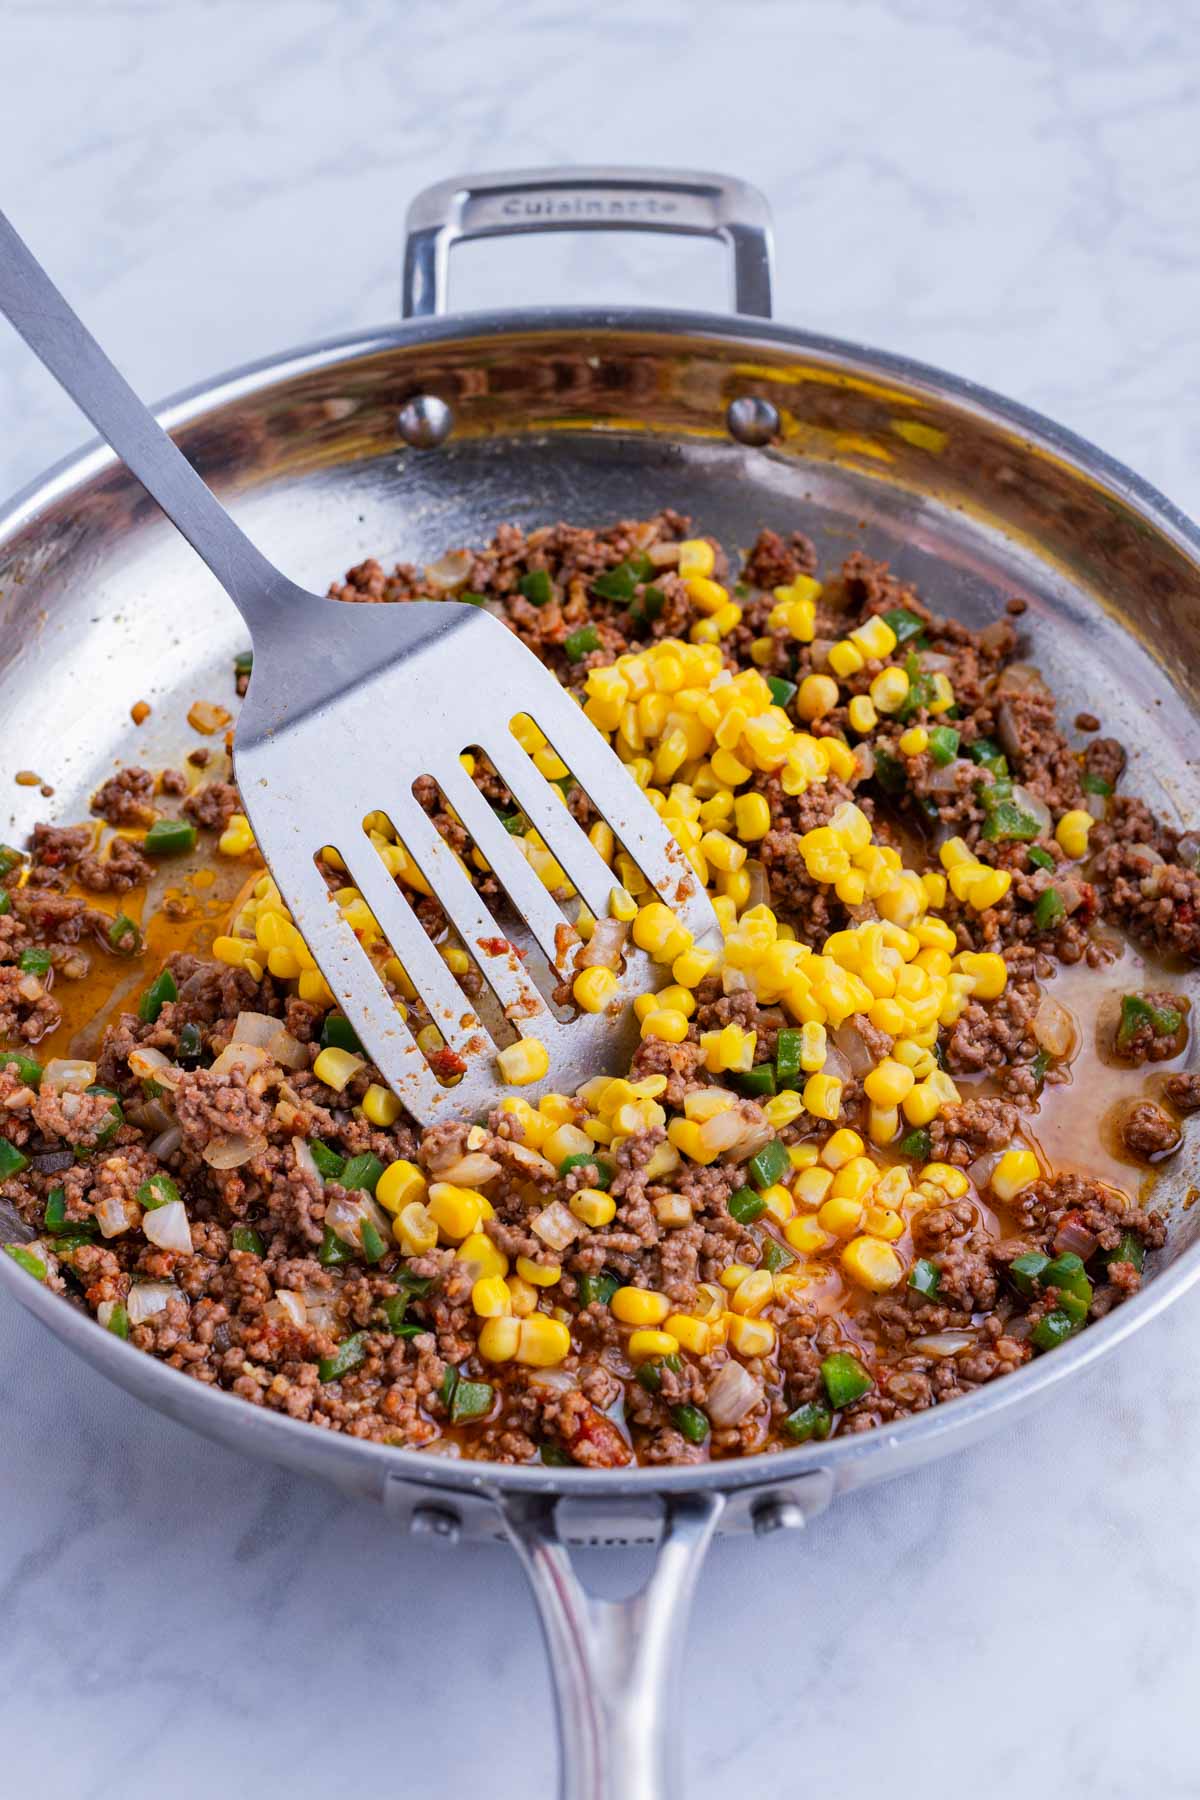 Corn is added to the beef and veggie mixture.